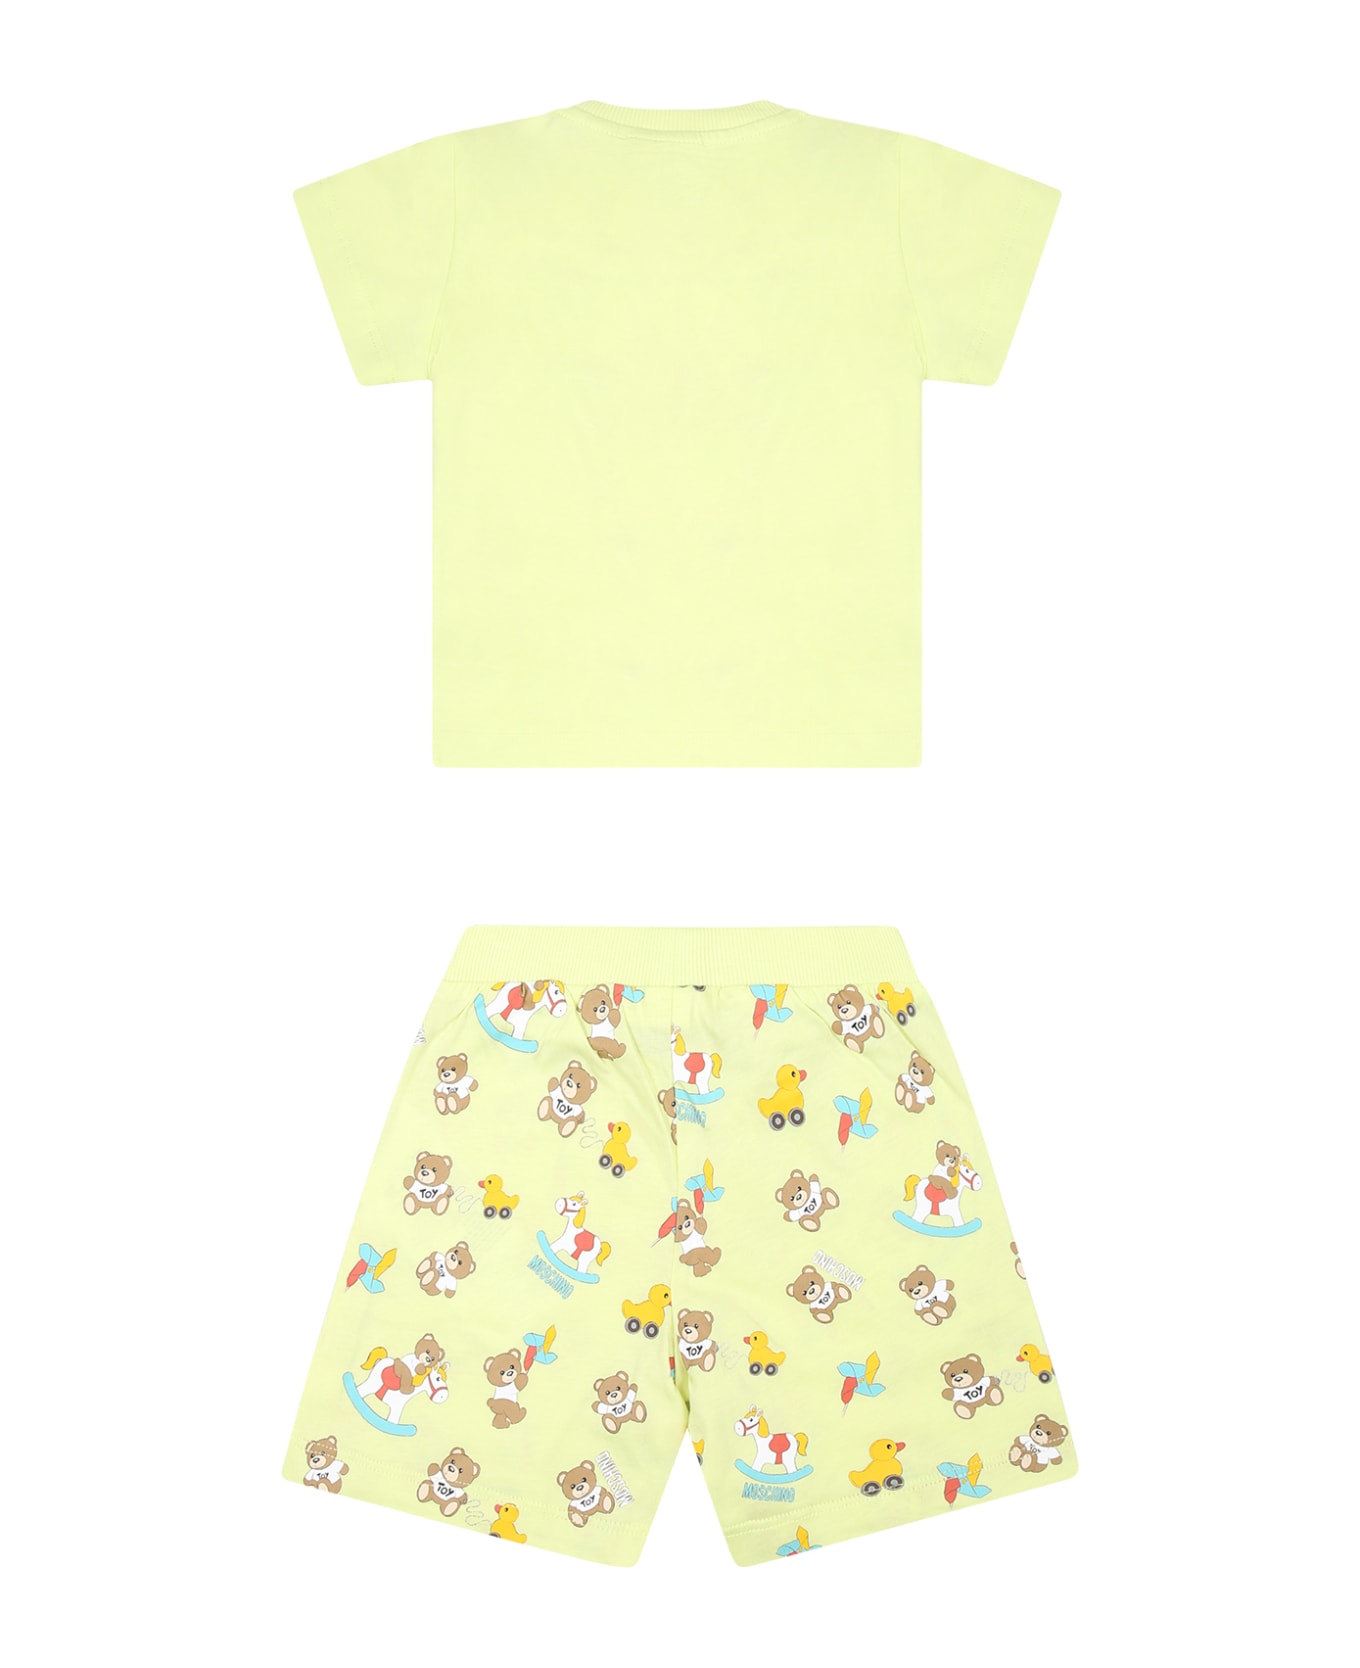 Moschino Yellow Suit For Baby Boy With Teddy Bear And Pinwheel - Yellow ボトムス